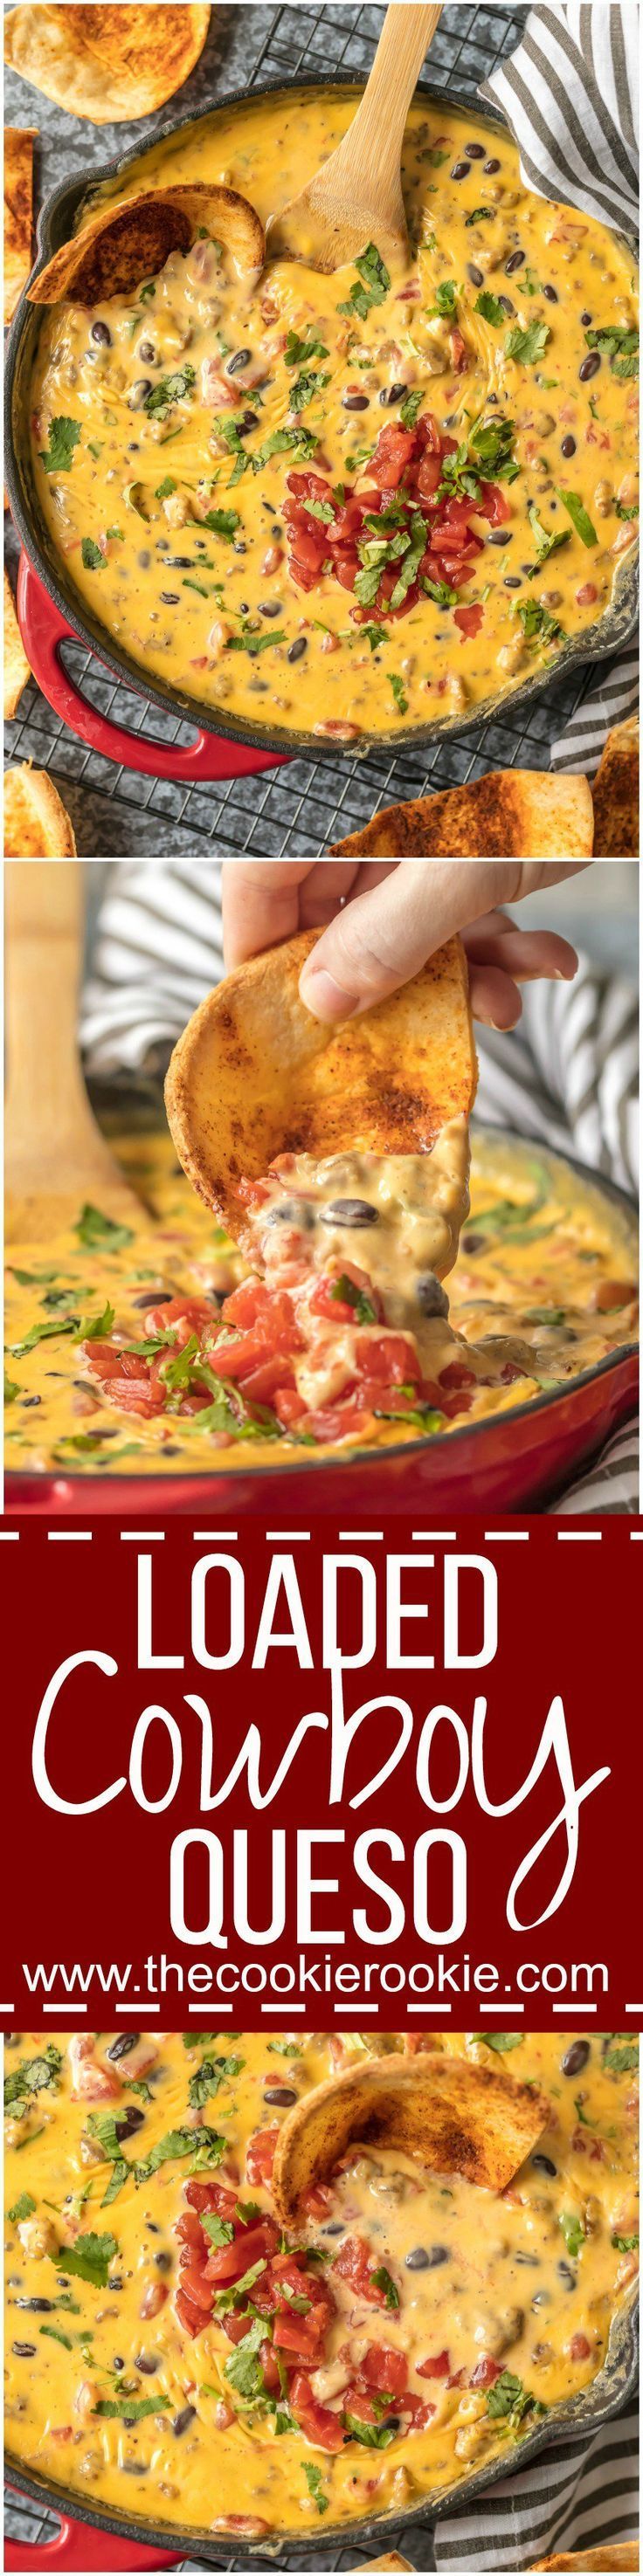 LOADED COWBOY QUESO is the ultimate Super Bowl dip! This EASY appetizer is loaded with velveeta, pepper jack, black beans, Rotel,